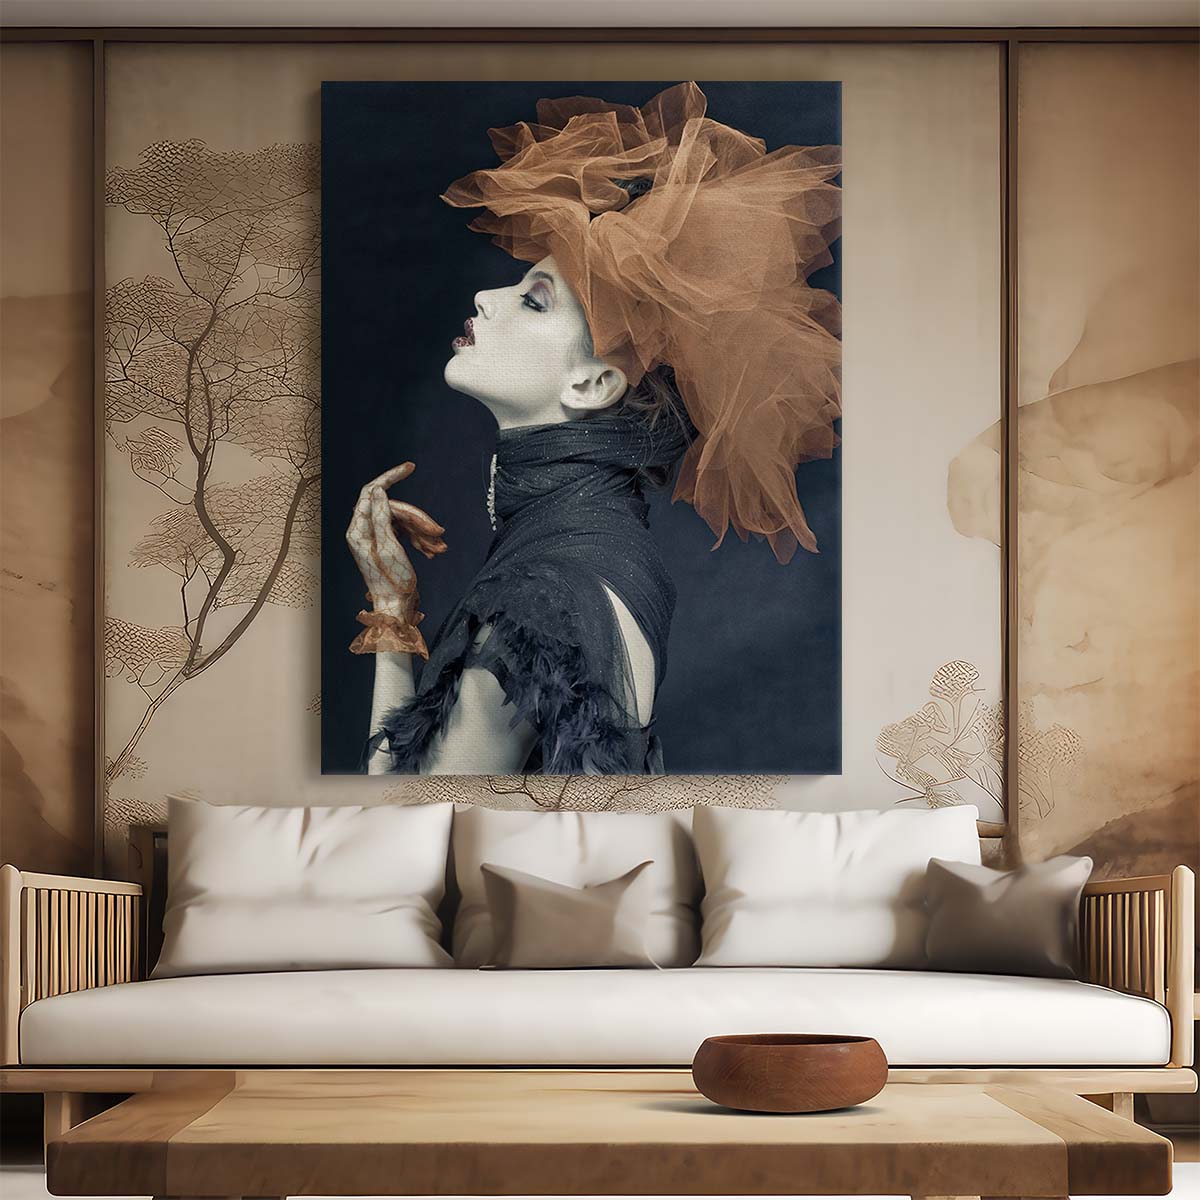 Fashion Model Woman Portrait Photography with Silk Accents by Luxuriance Designs, made in USA